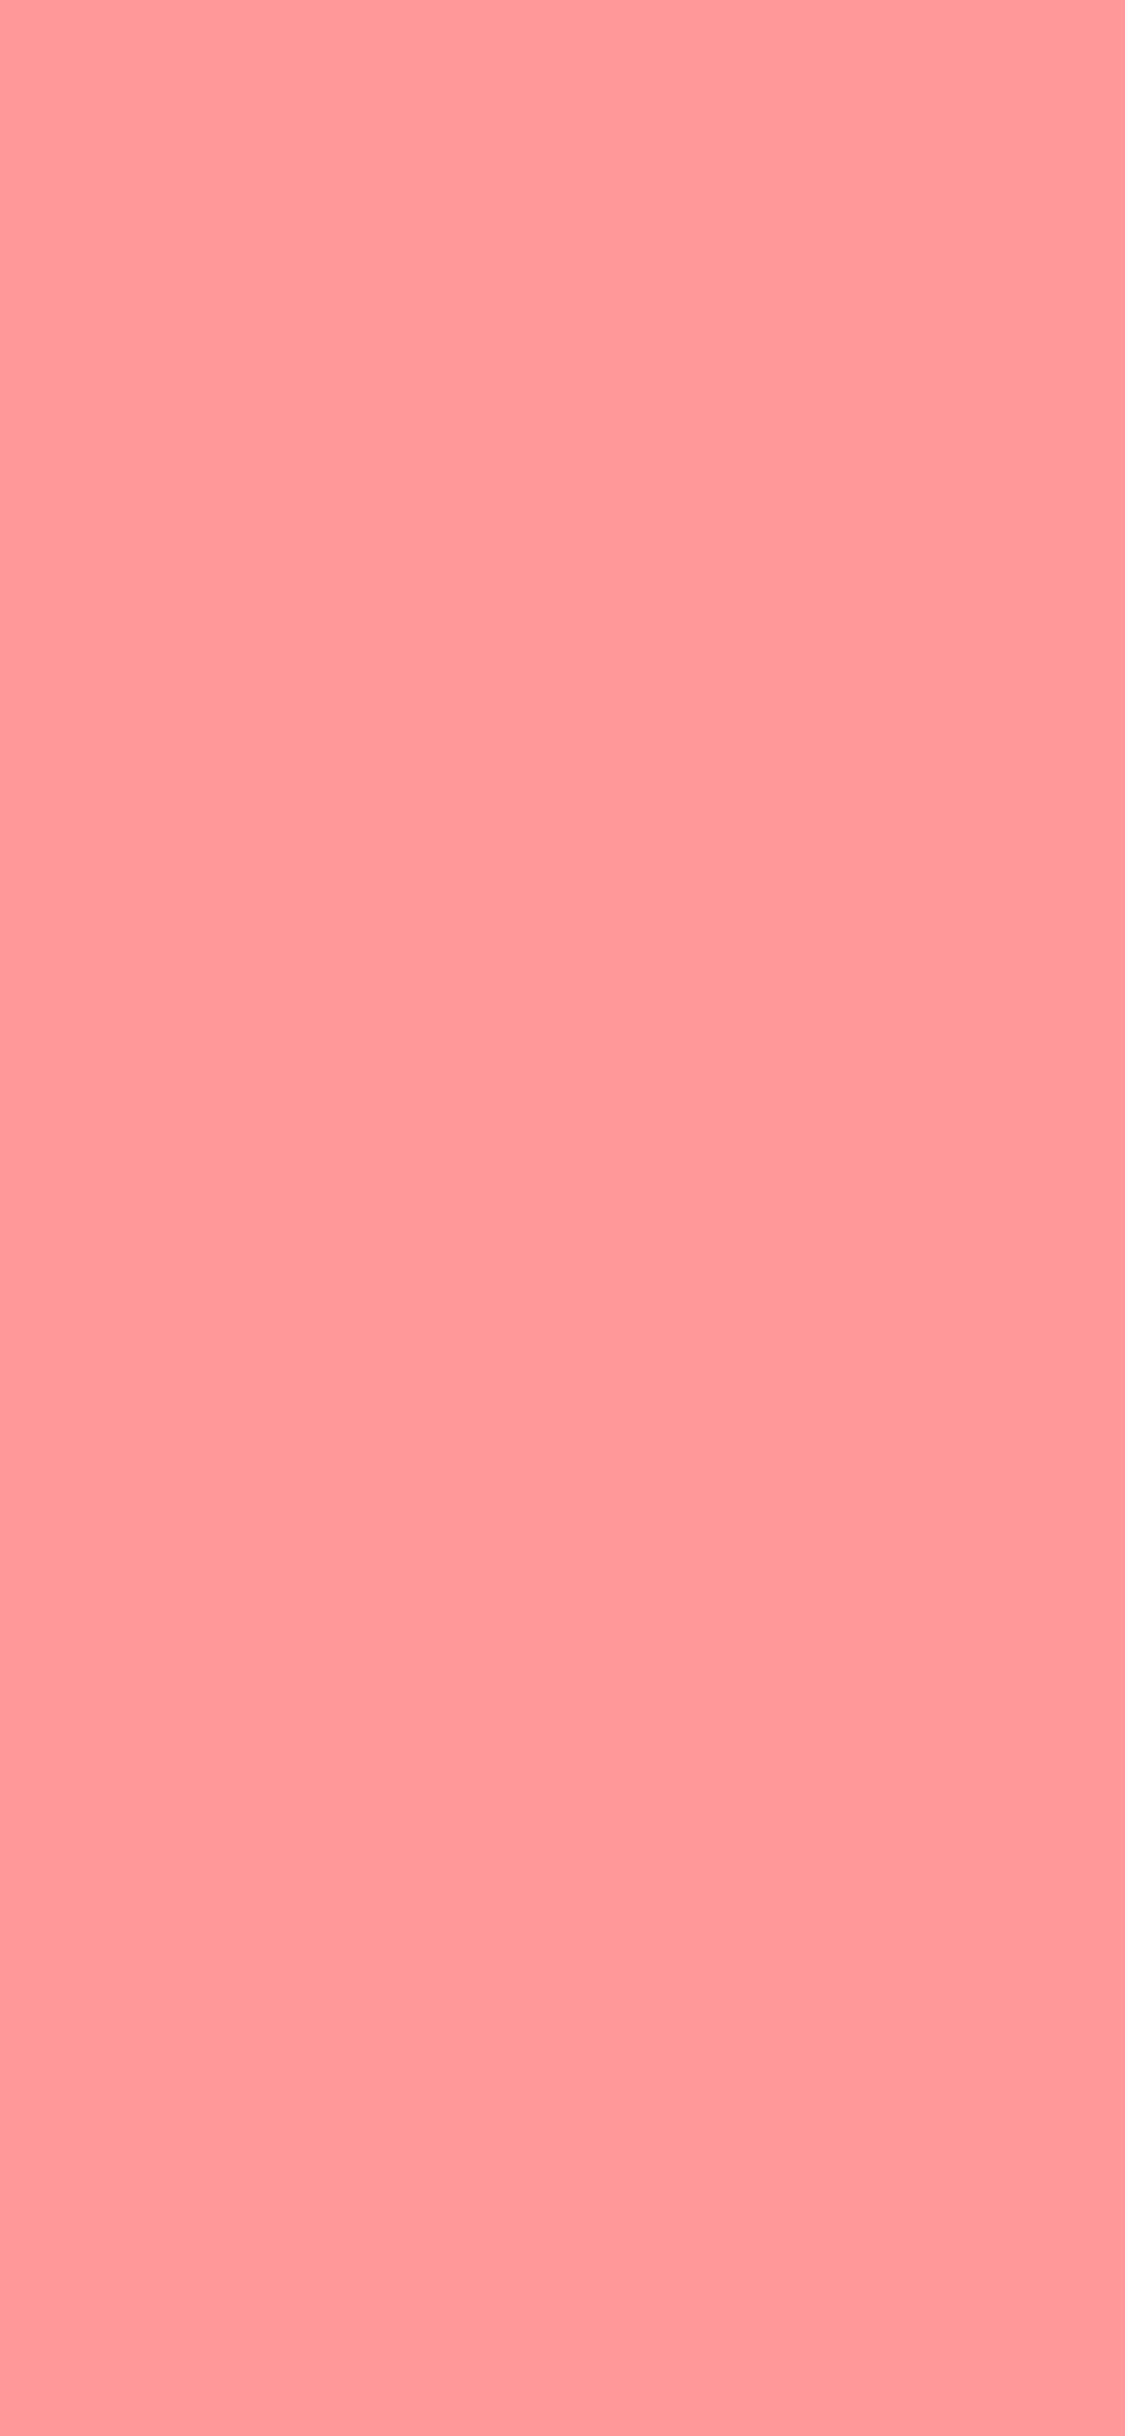 1125x2436 Light Salmon Pink Solid Color Background